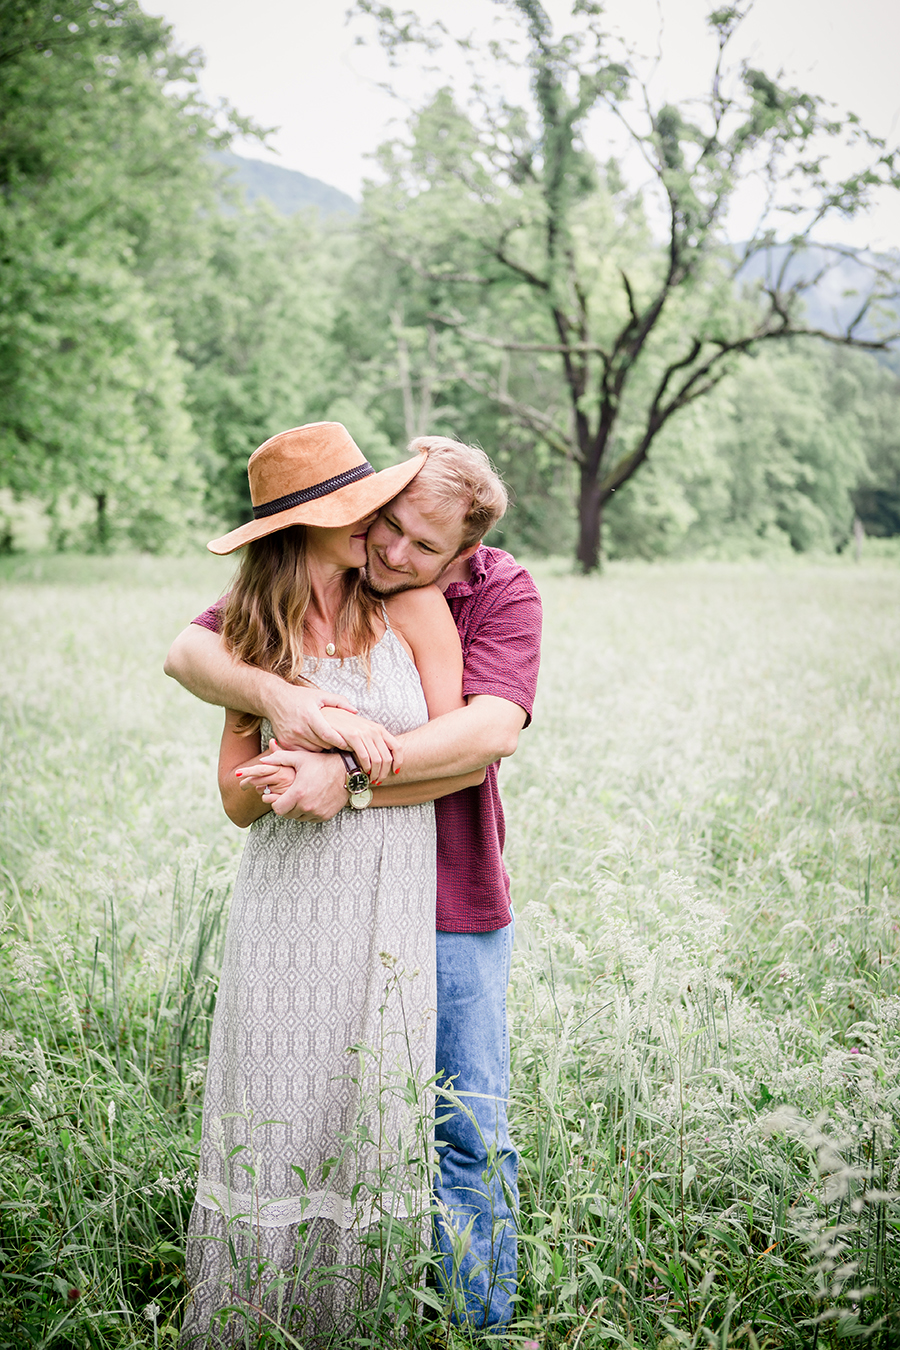 His arms around her body engagement photo by Knoxville Wedding Photographer, Amanda May Photos.